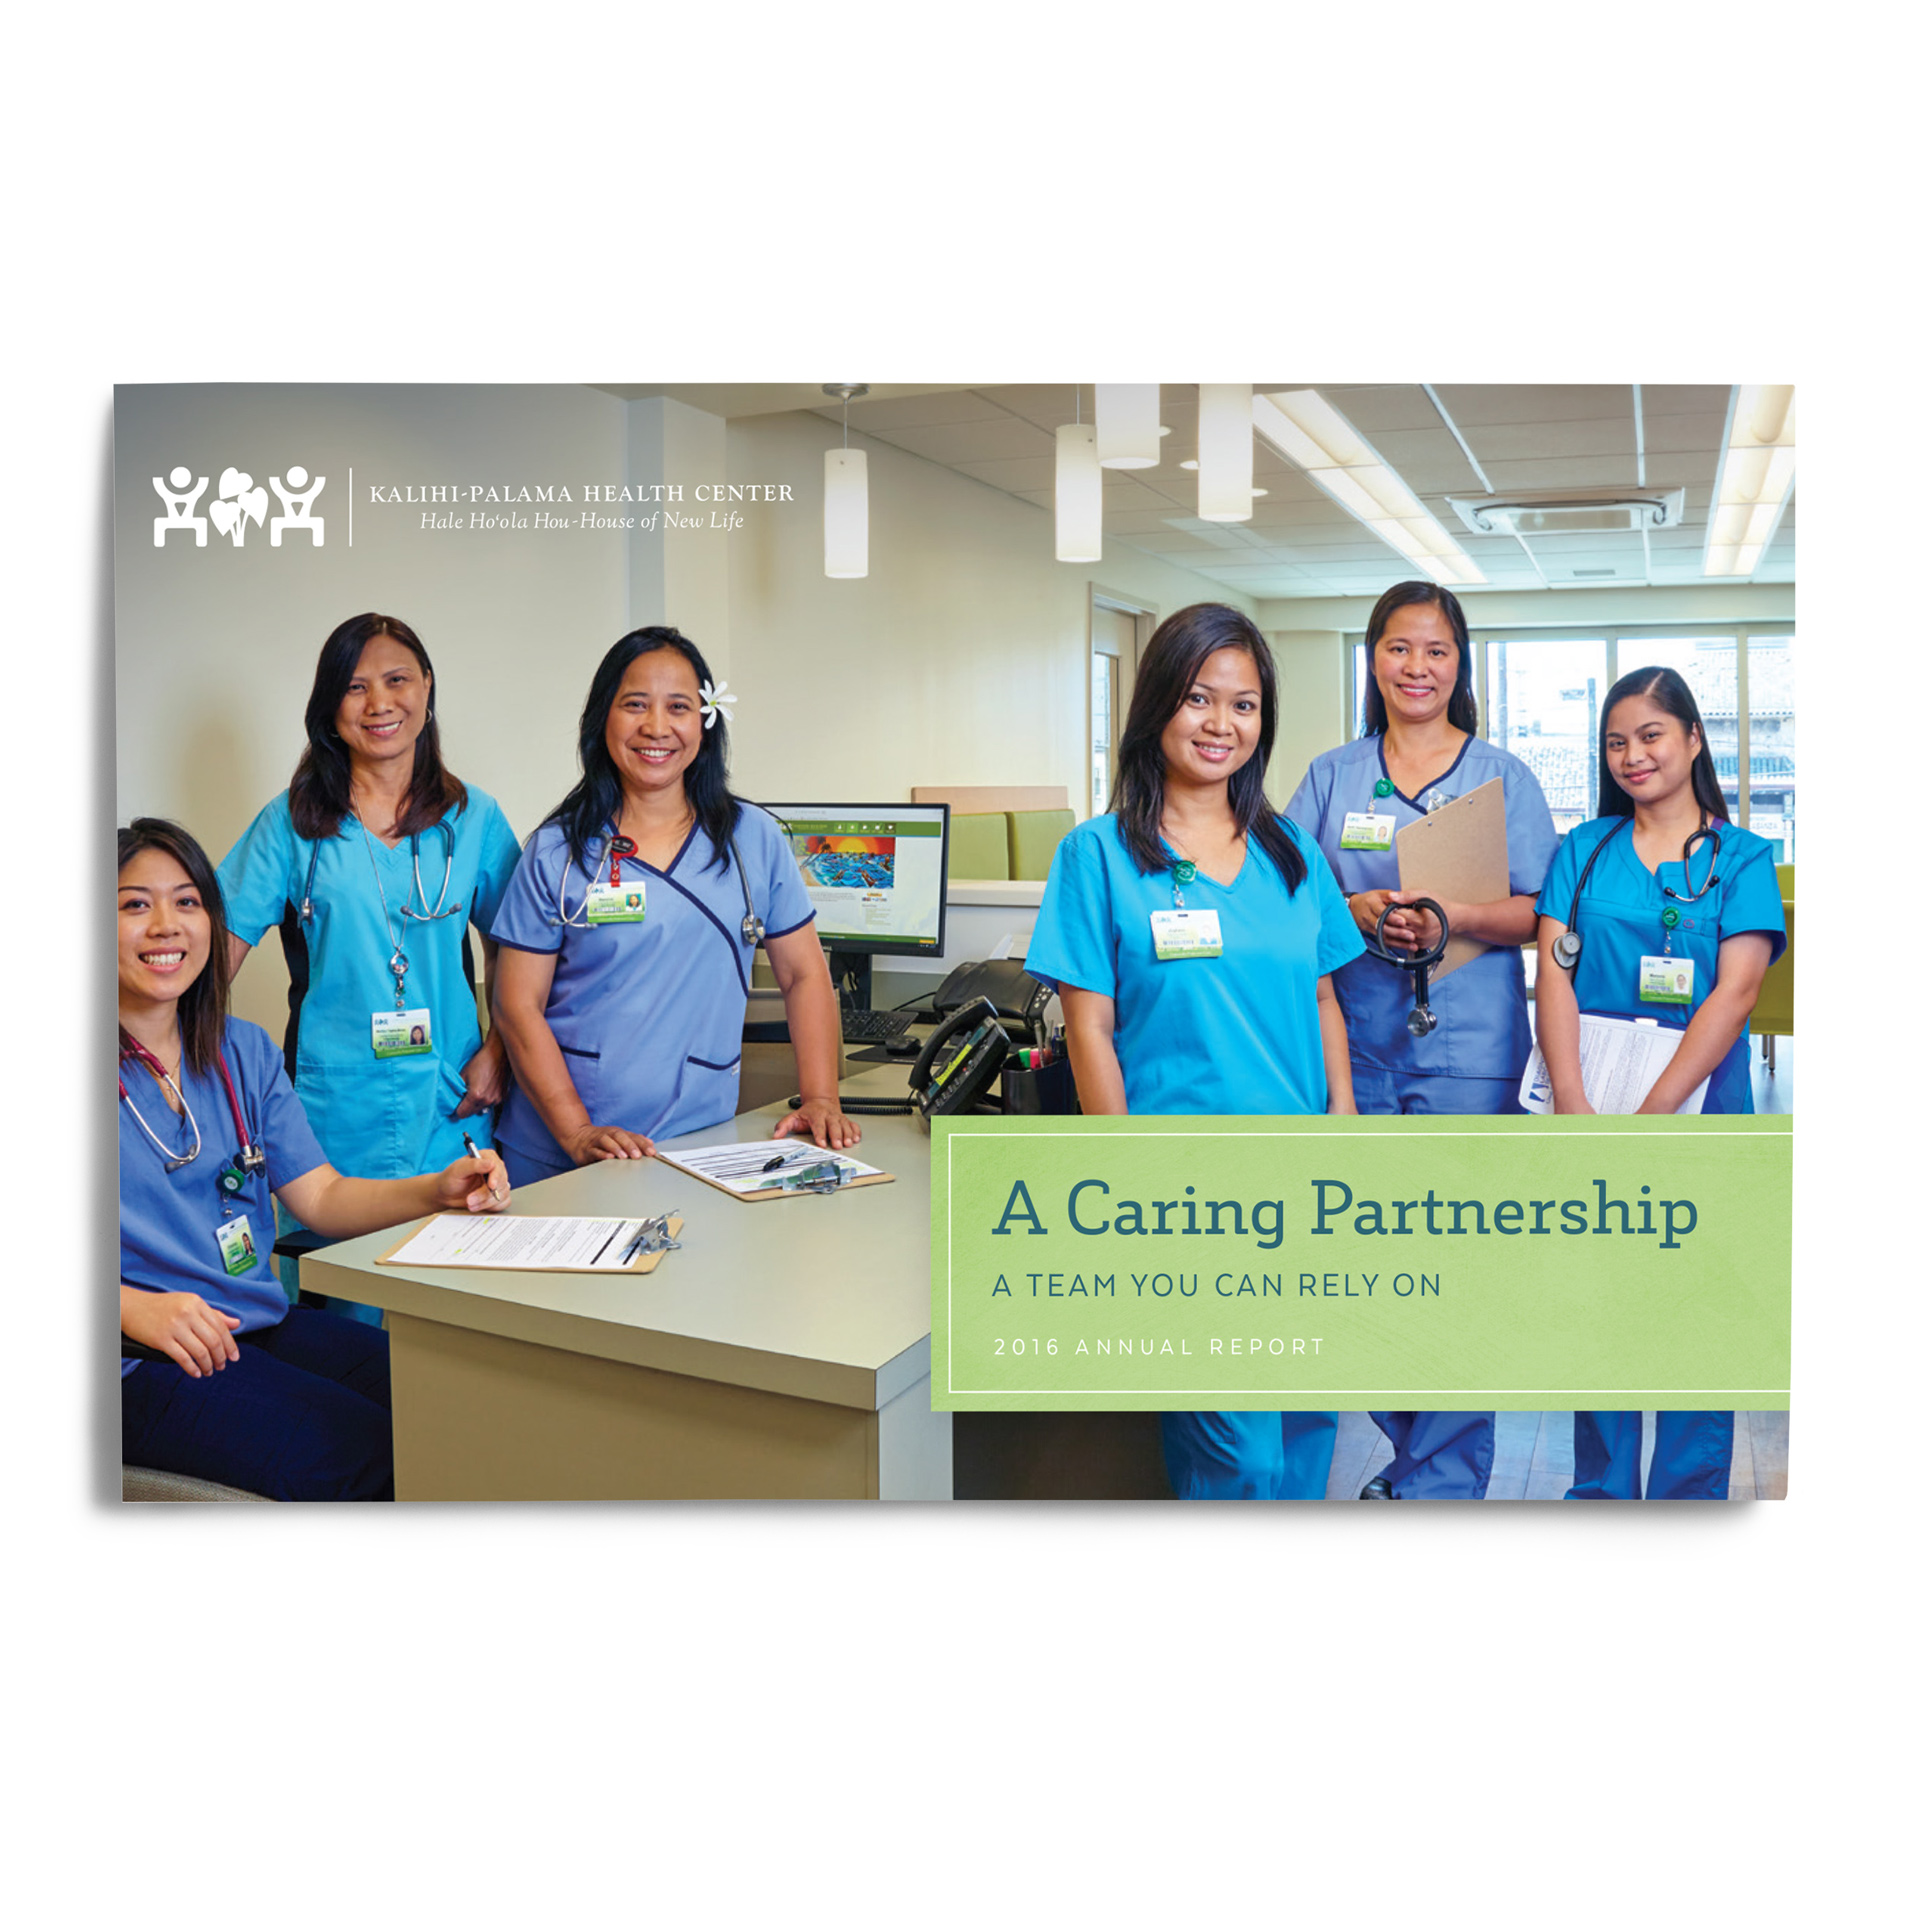 Kalihi Palama Health Center Annual Report Stacey Leong Design